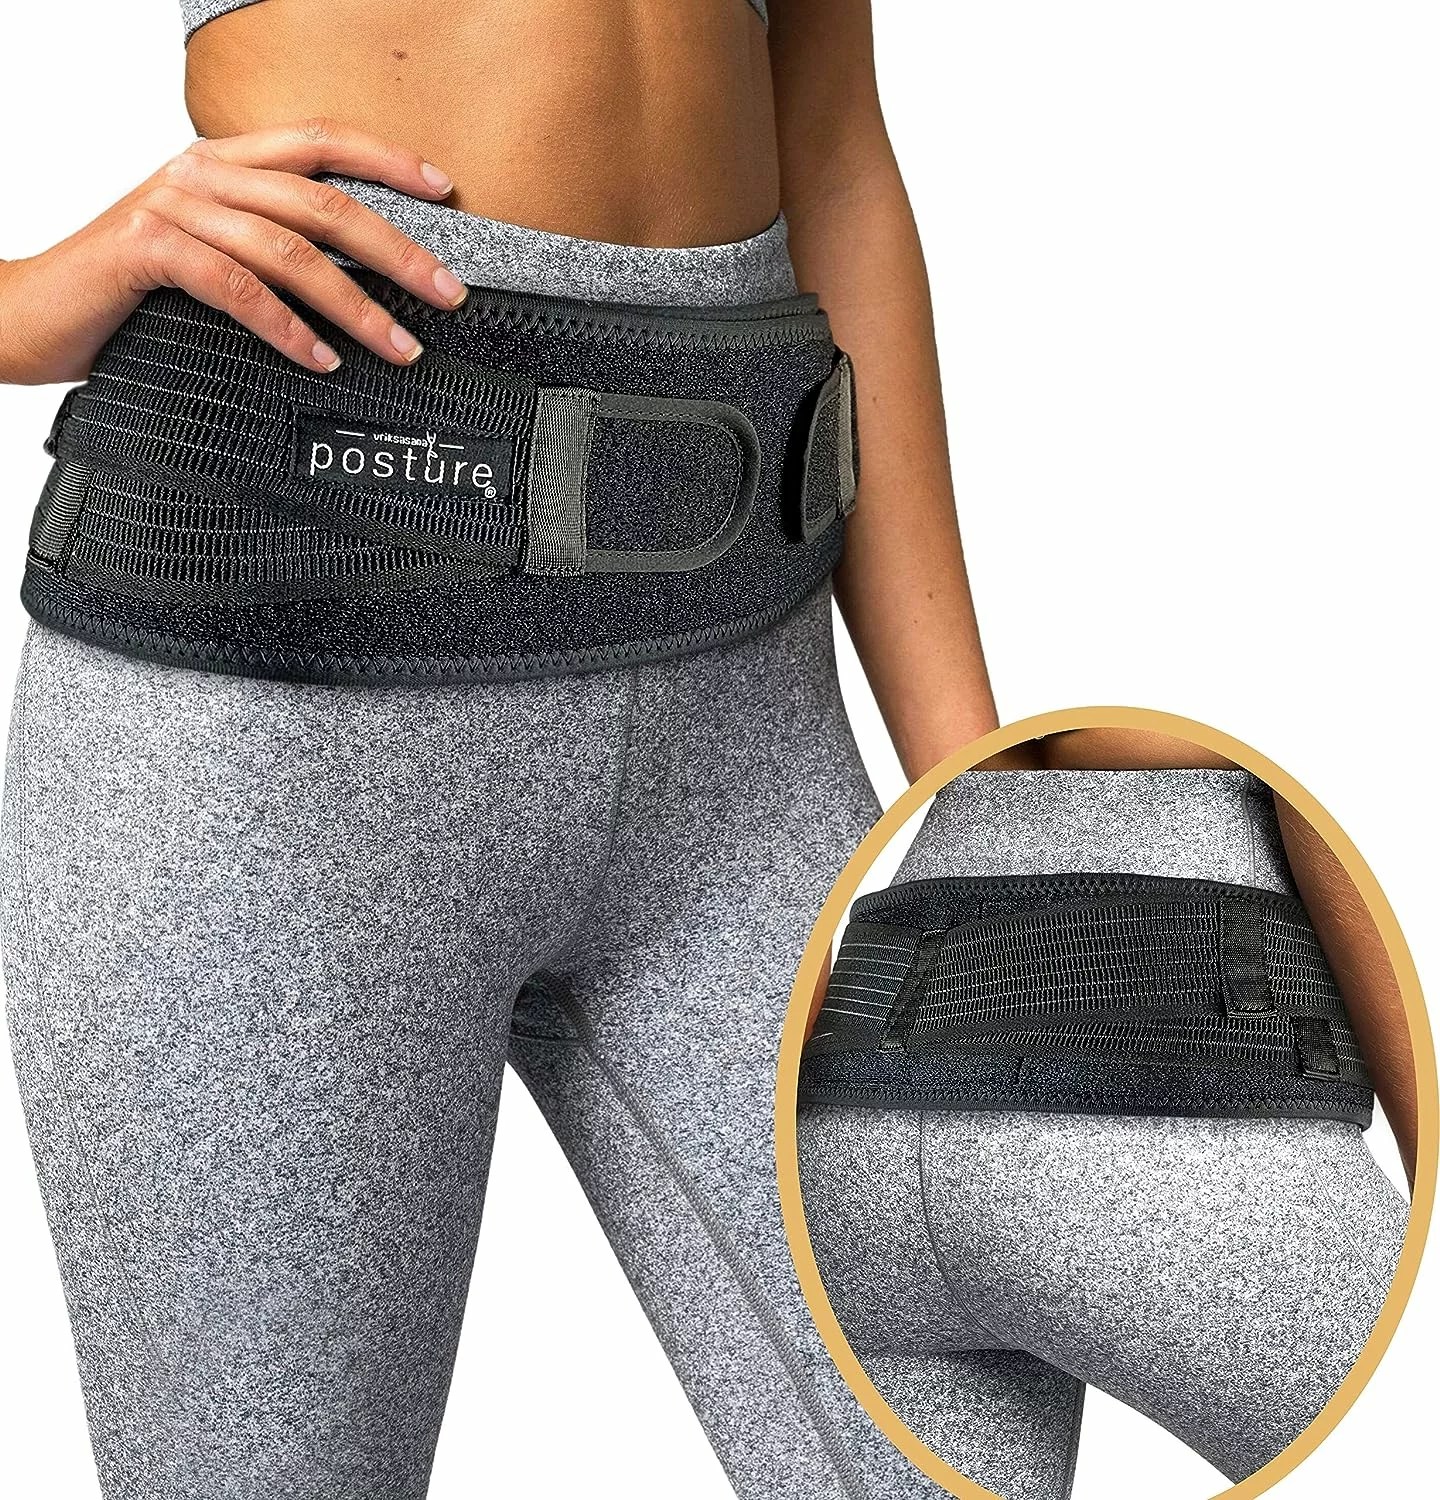 Hip belt for back pain, recommended by chiropractors for chronic back pain during flight